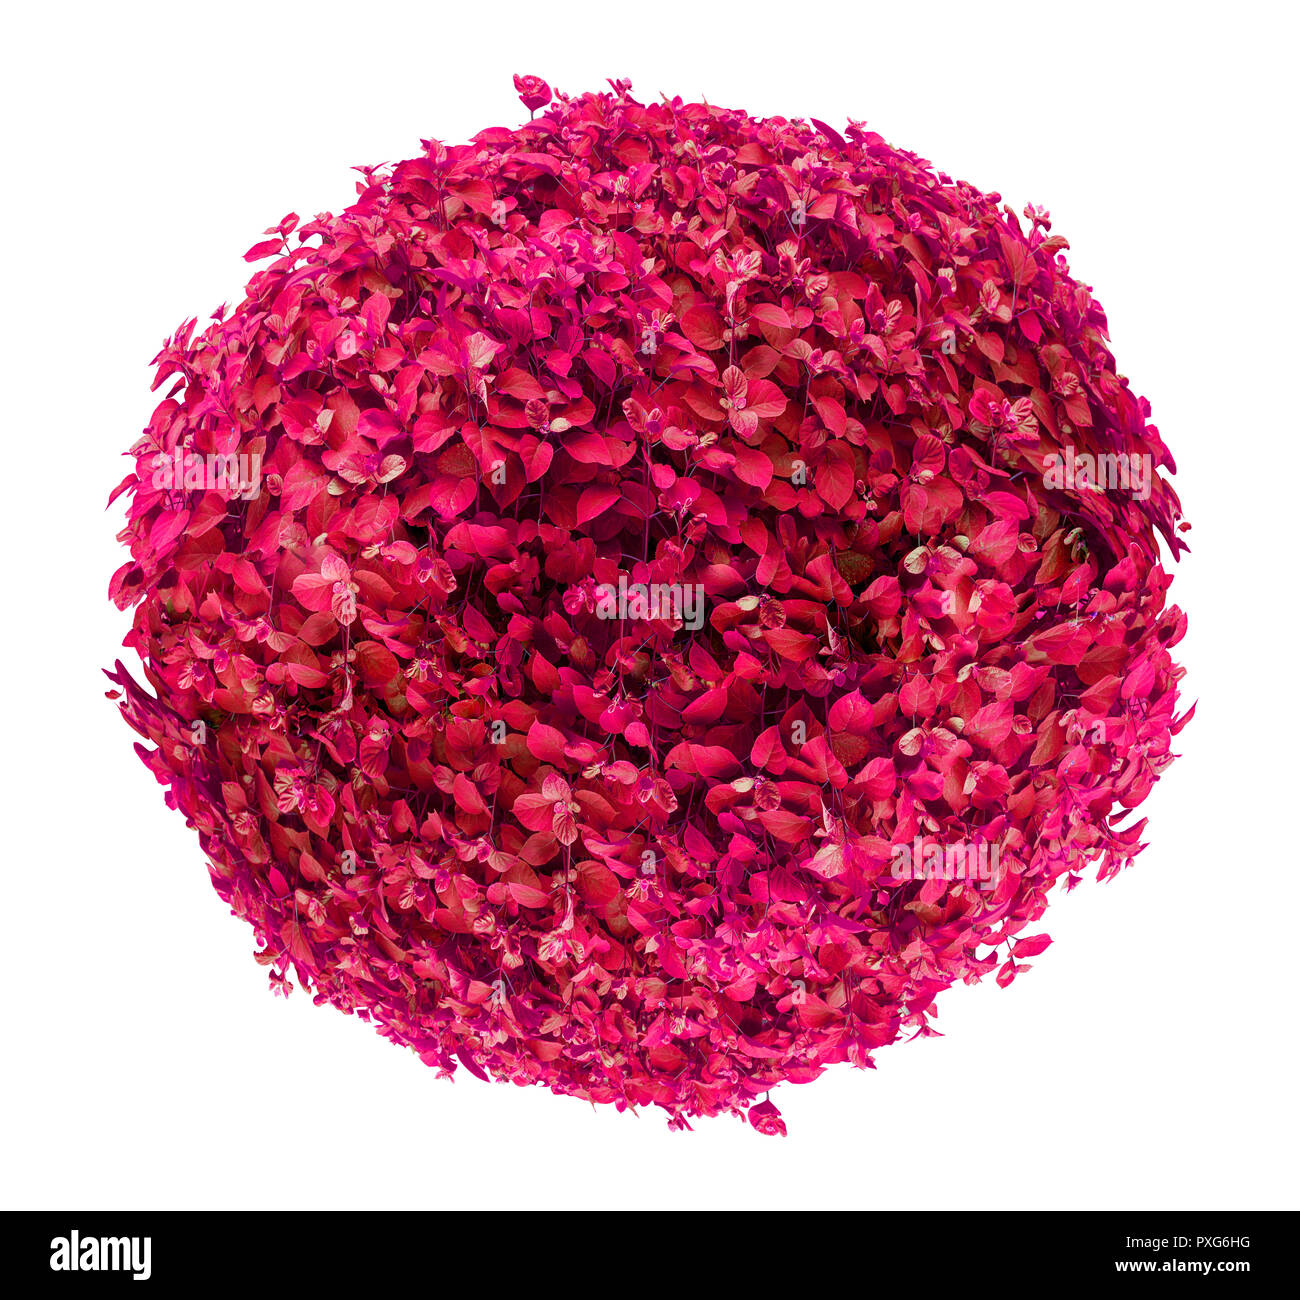 Beautiful ball shaped pink/red bush isolated on white background Stock Photo